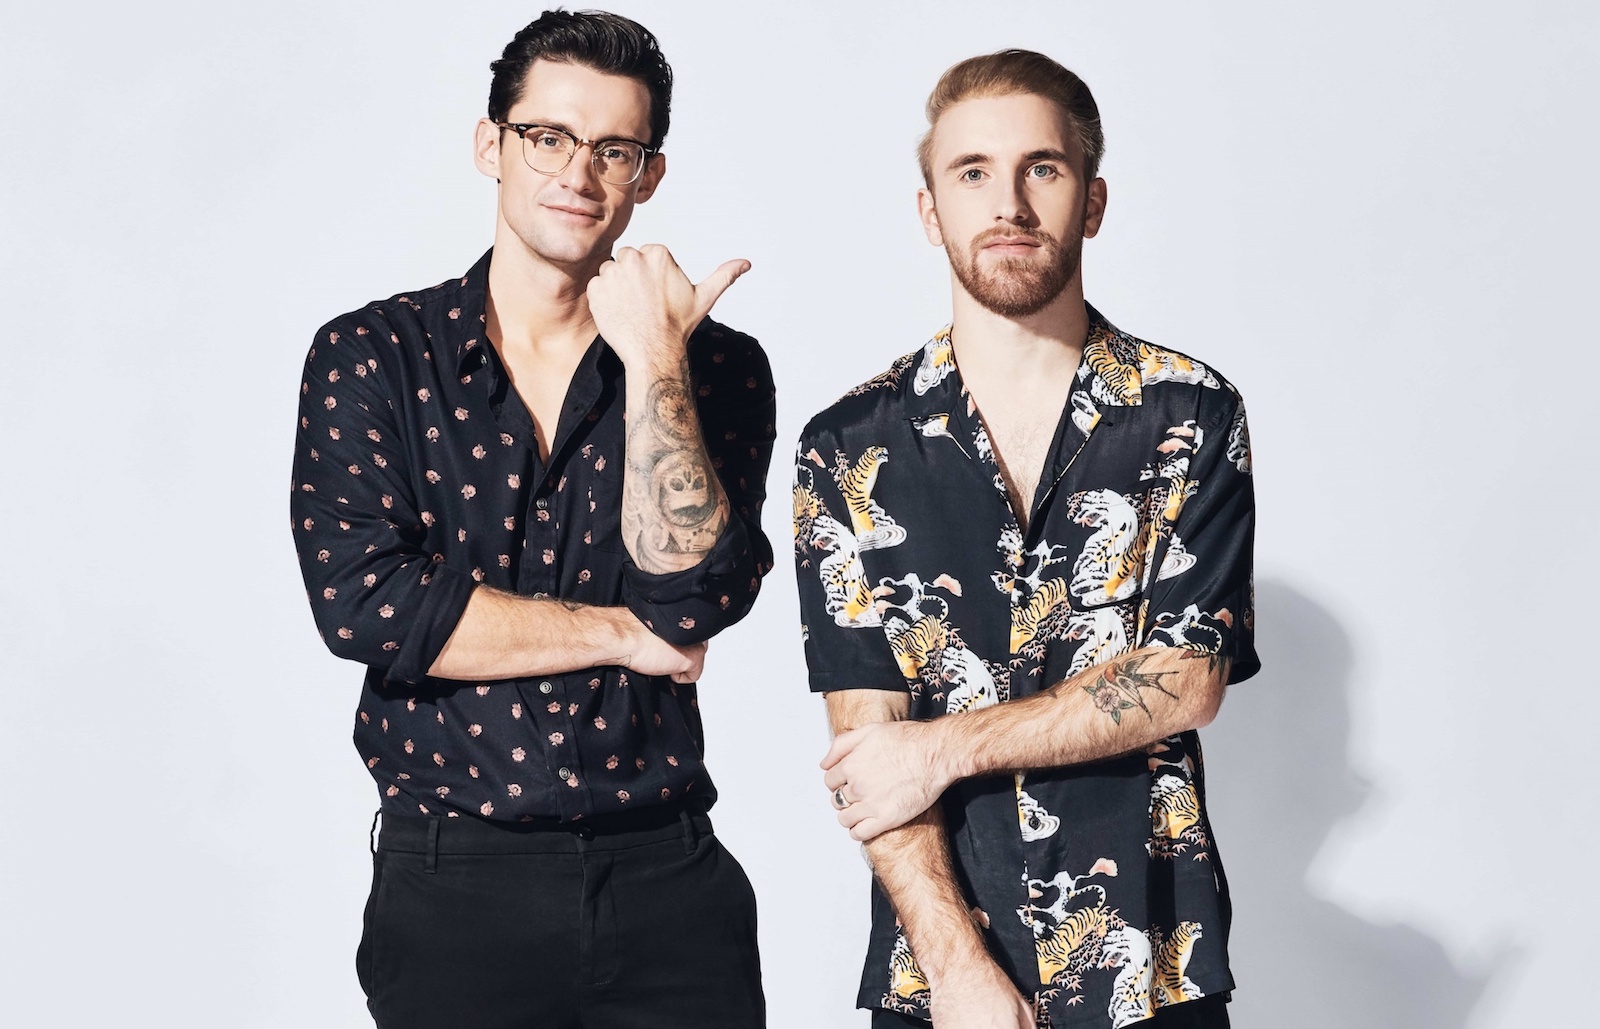 How Aussie duo Seaforth landed a deal with Sony Music Nashville